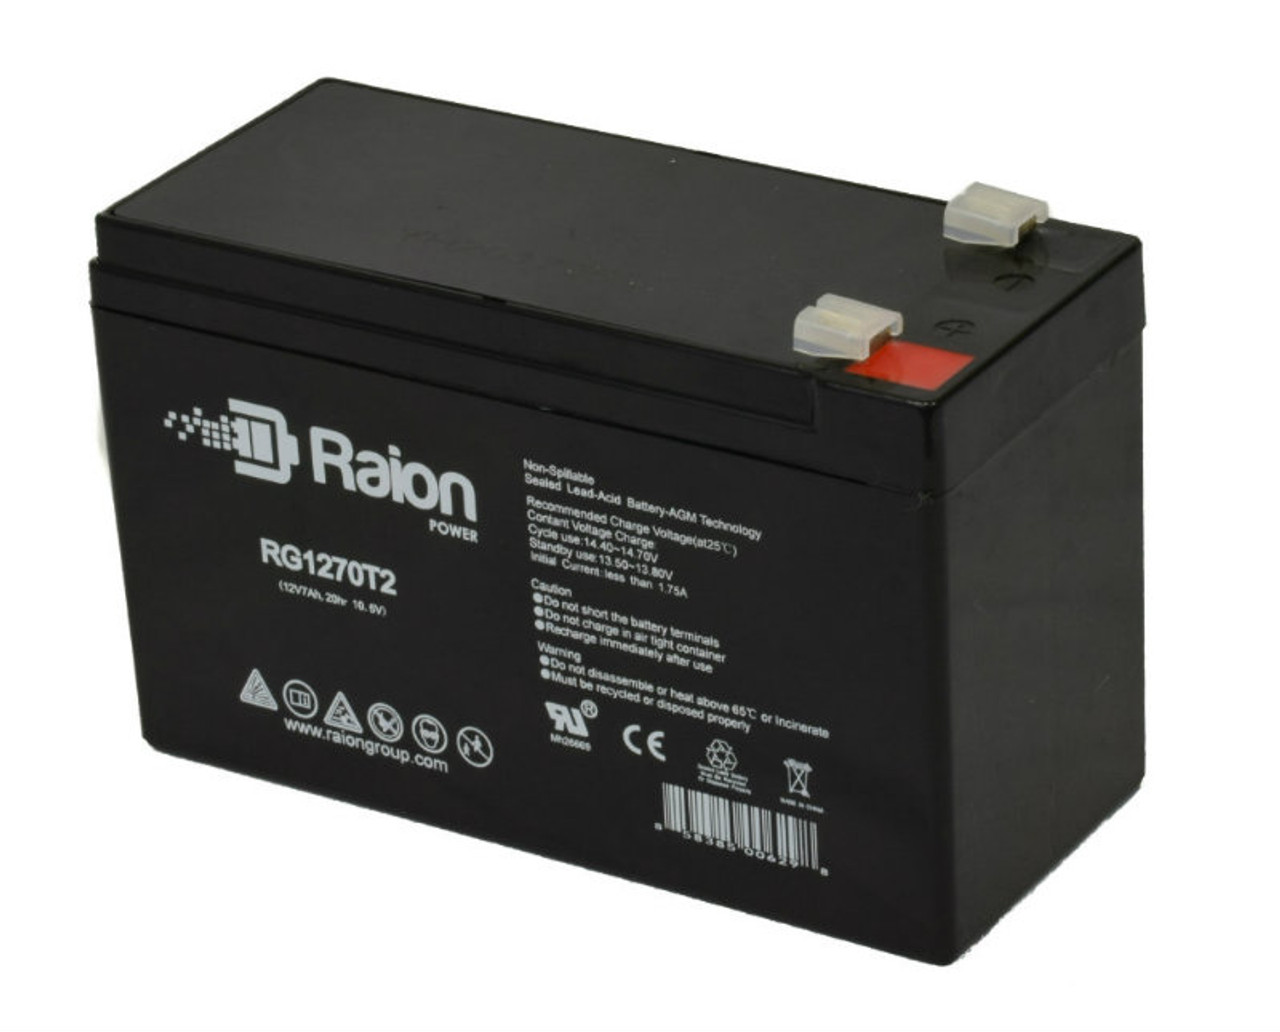 Raion Power Replacement 12V 7Ah Battery for Cyclops Spotlight CY-0112 - 1 Pack